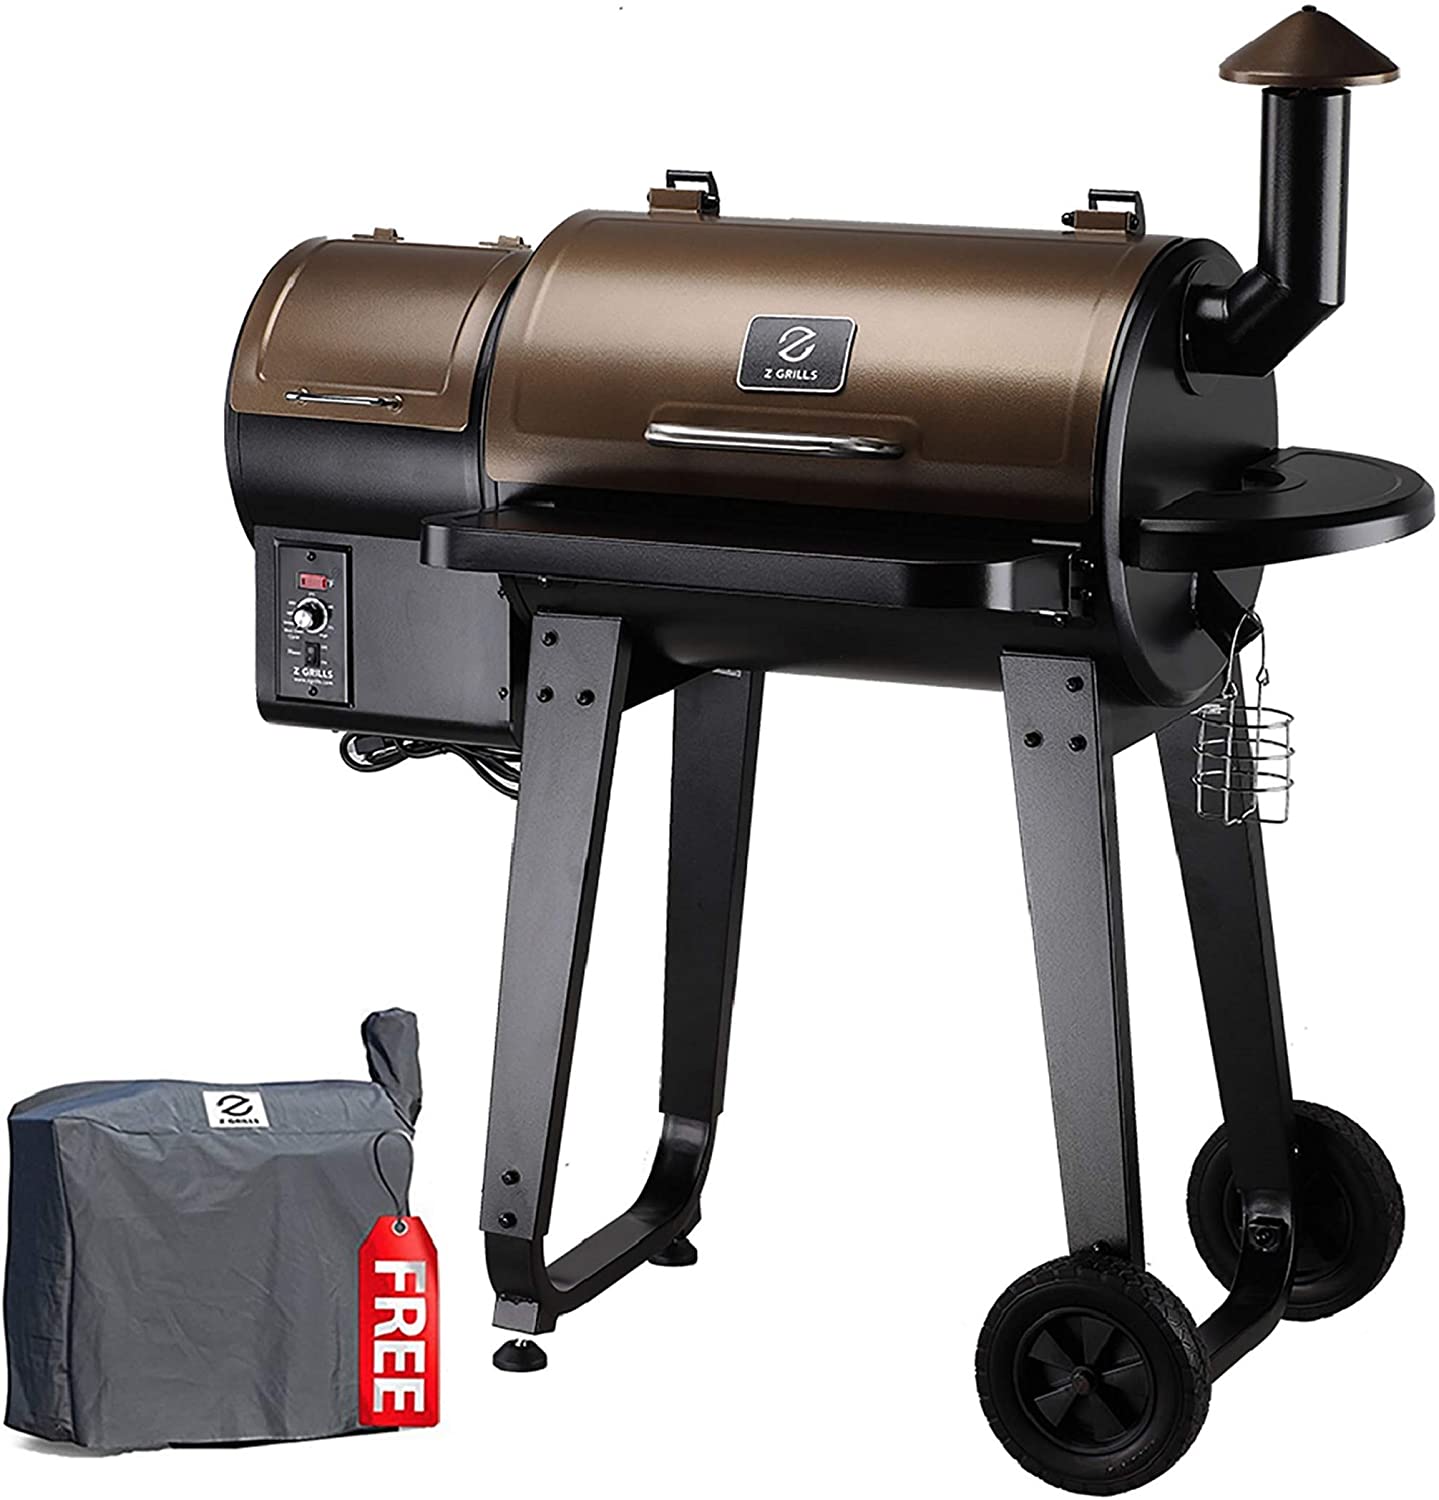 Z GRILLS ZPG-450A 2020 Upgrade Wood Pellet Grill & Smoker 6 in 1 BBQ Grill Auto Temperature Control, 450 sq in, Bronze - image 1 of 7